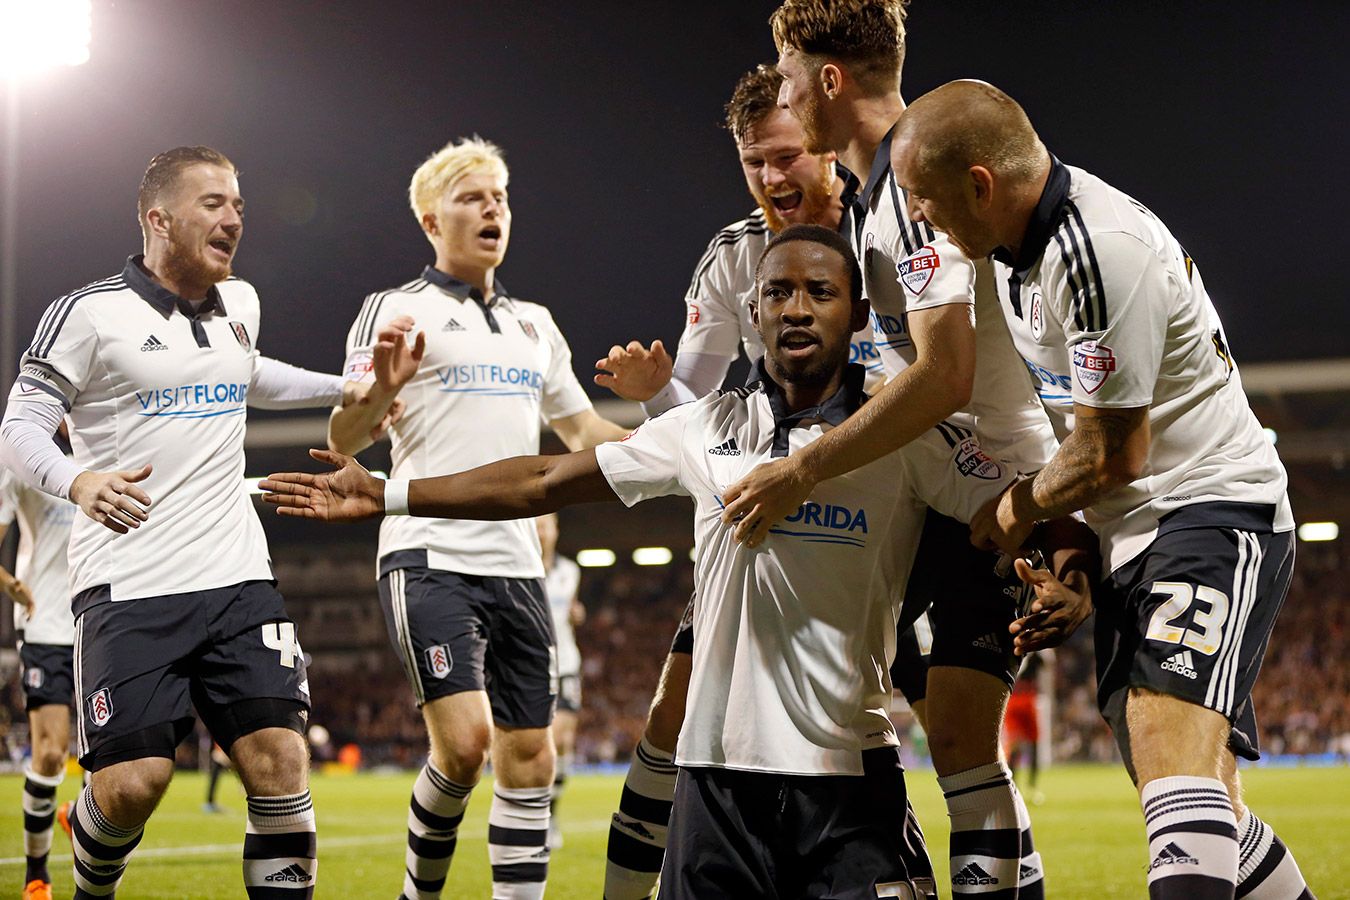 Fulham players celebrating scoring a goal. Photo: Backpage Images